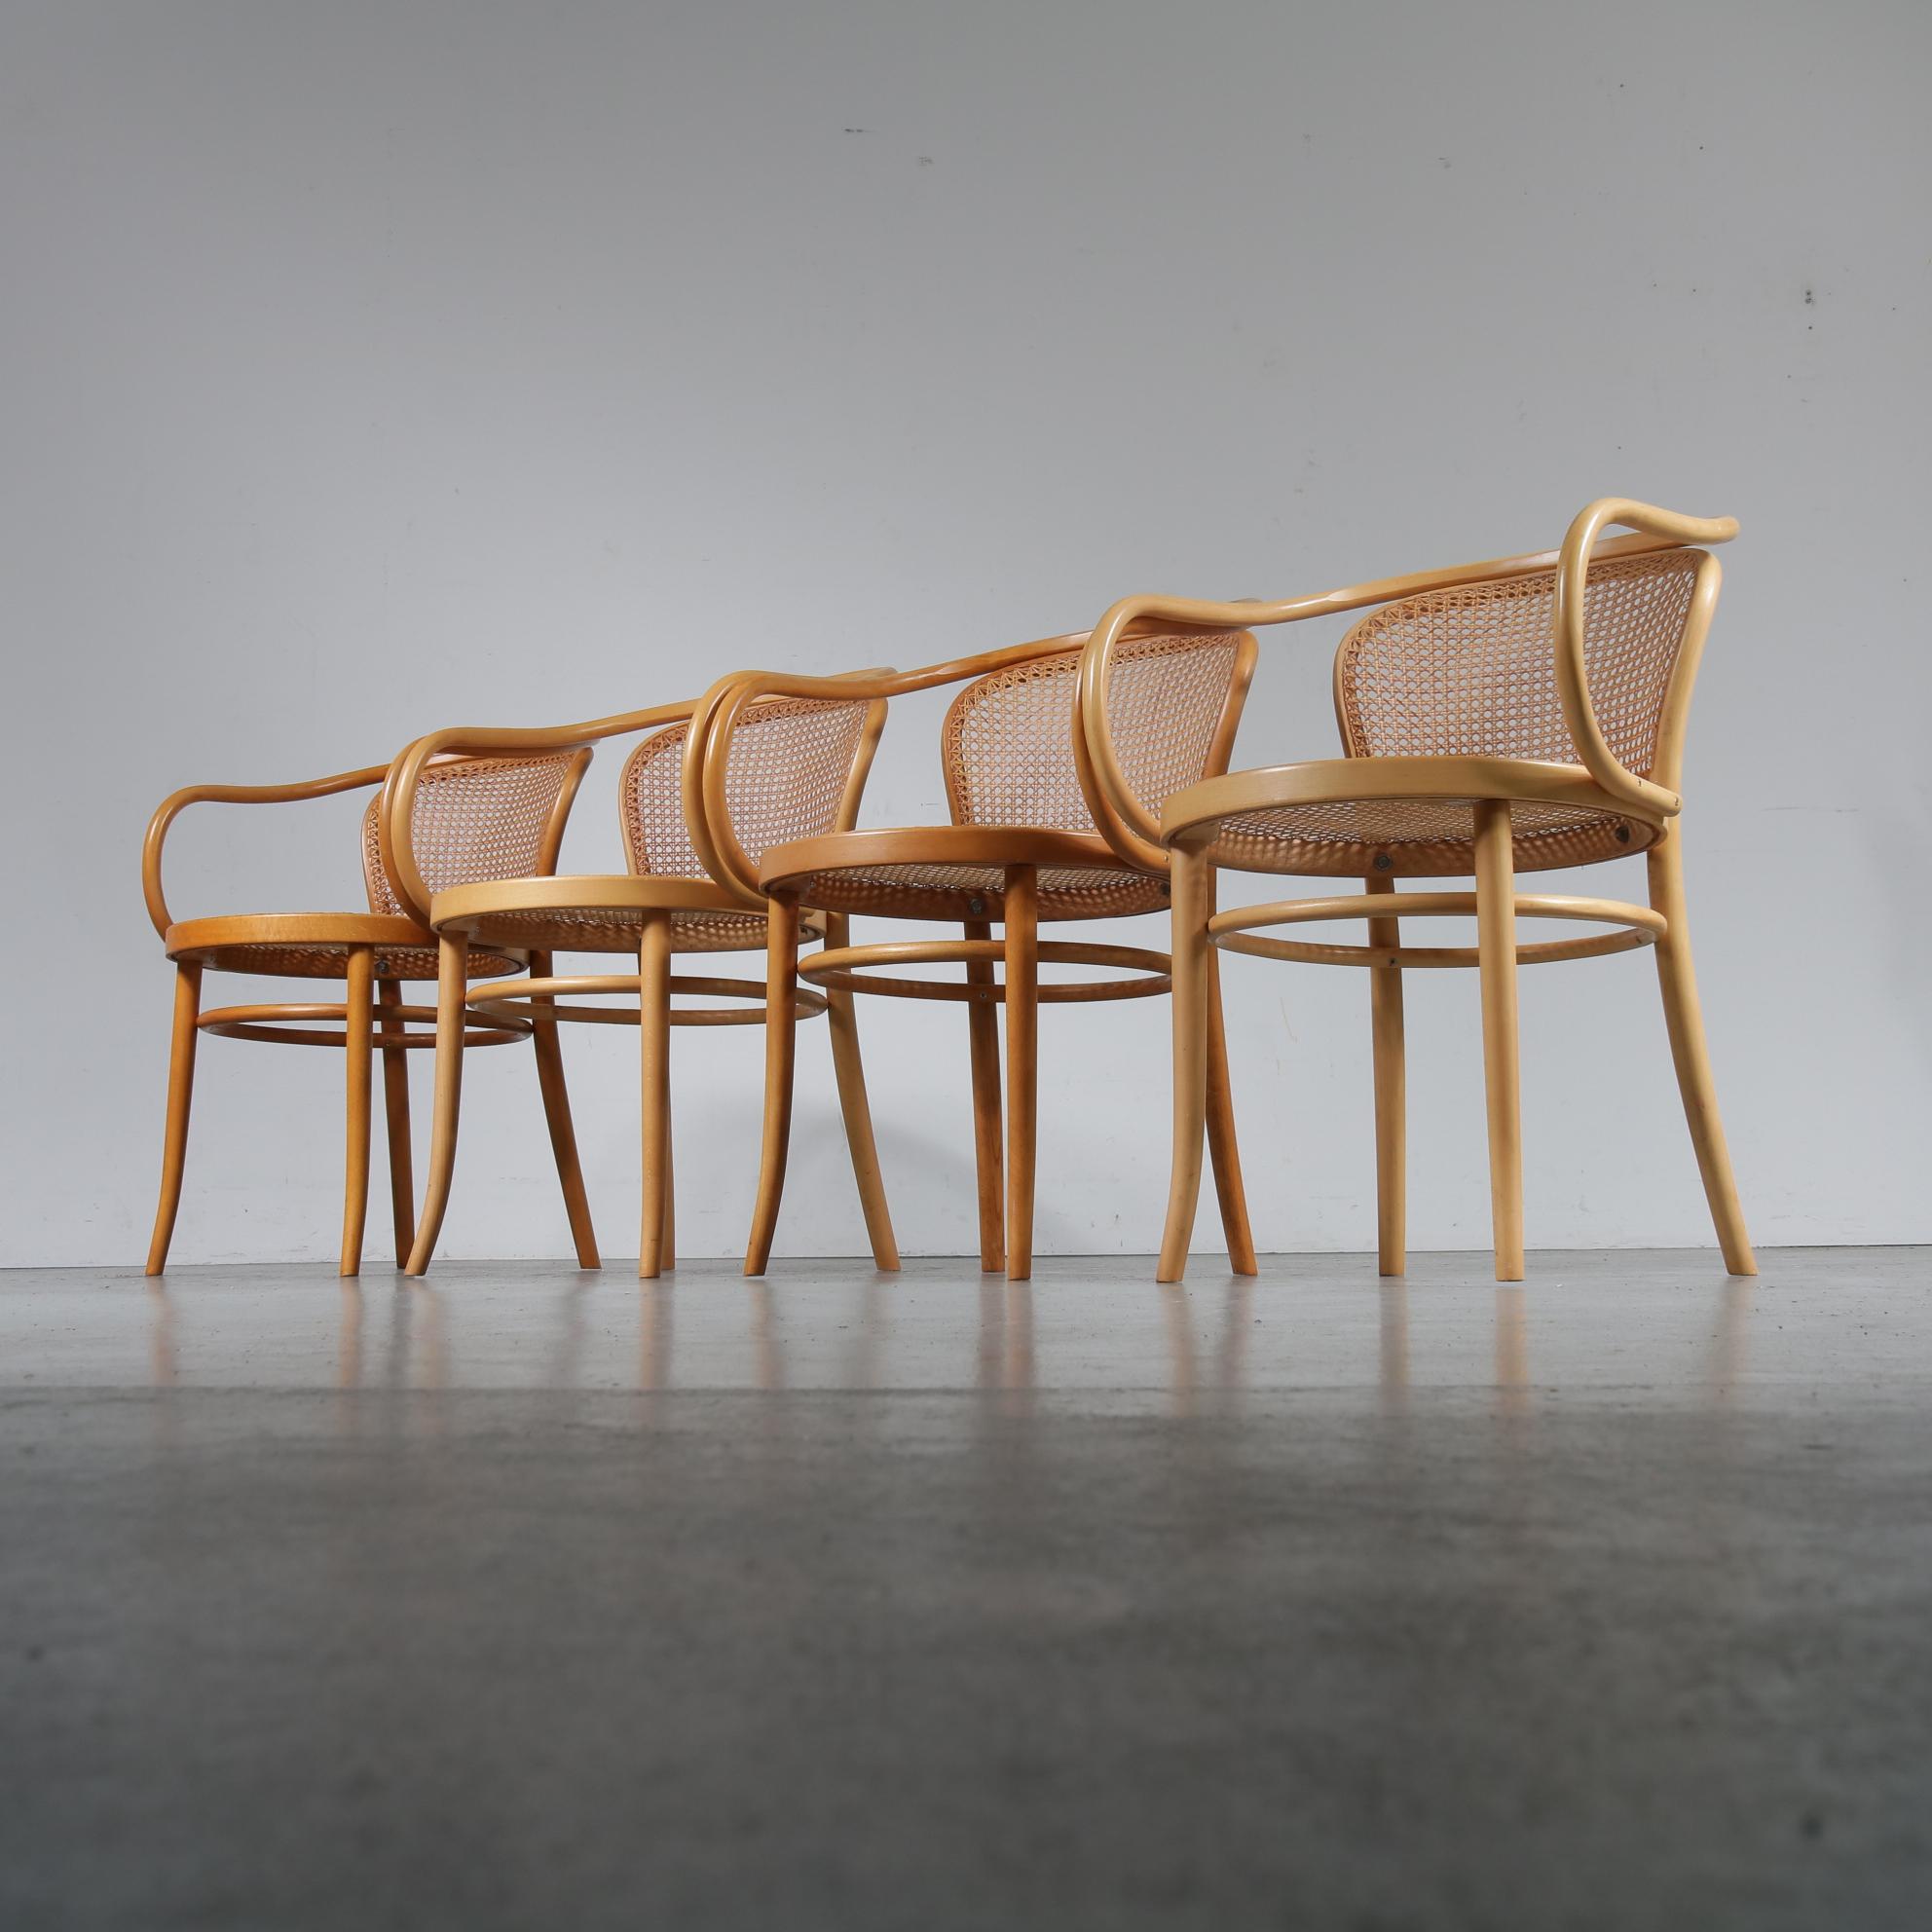 20th Century Set of Four Corbusier Armchairs by Michael Thonet, Germany 1920